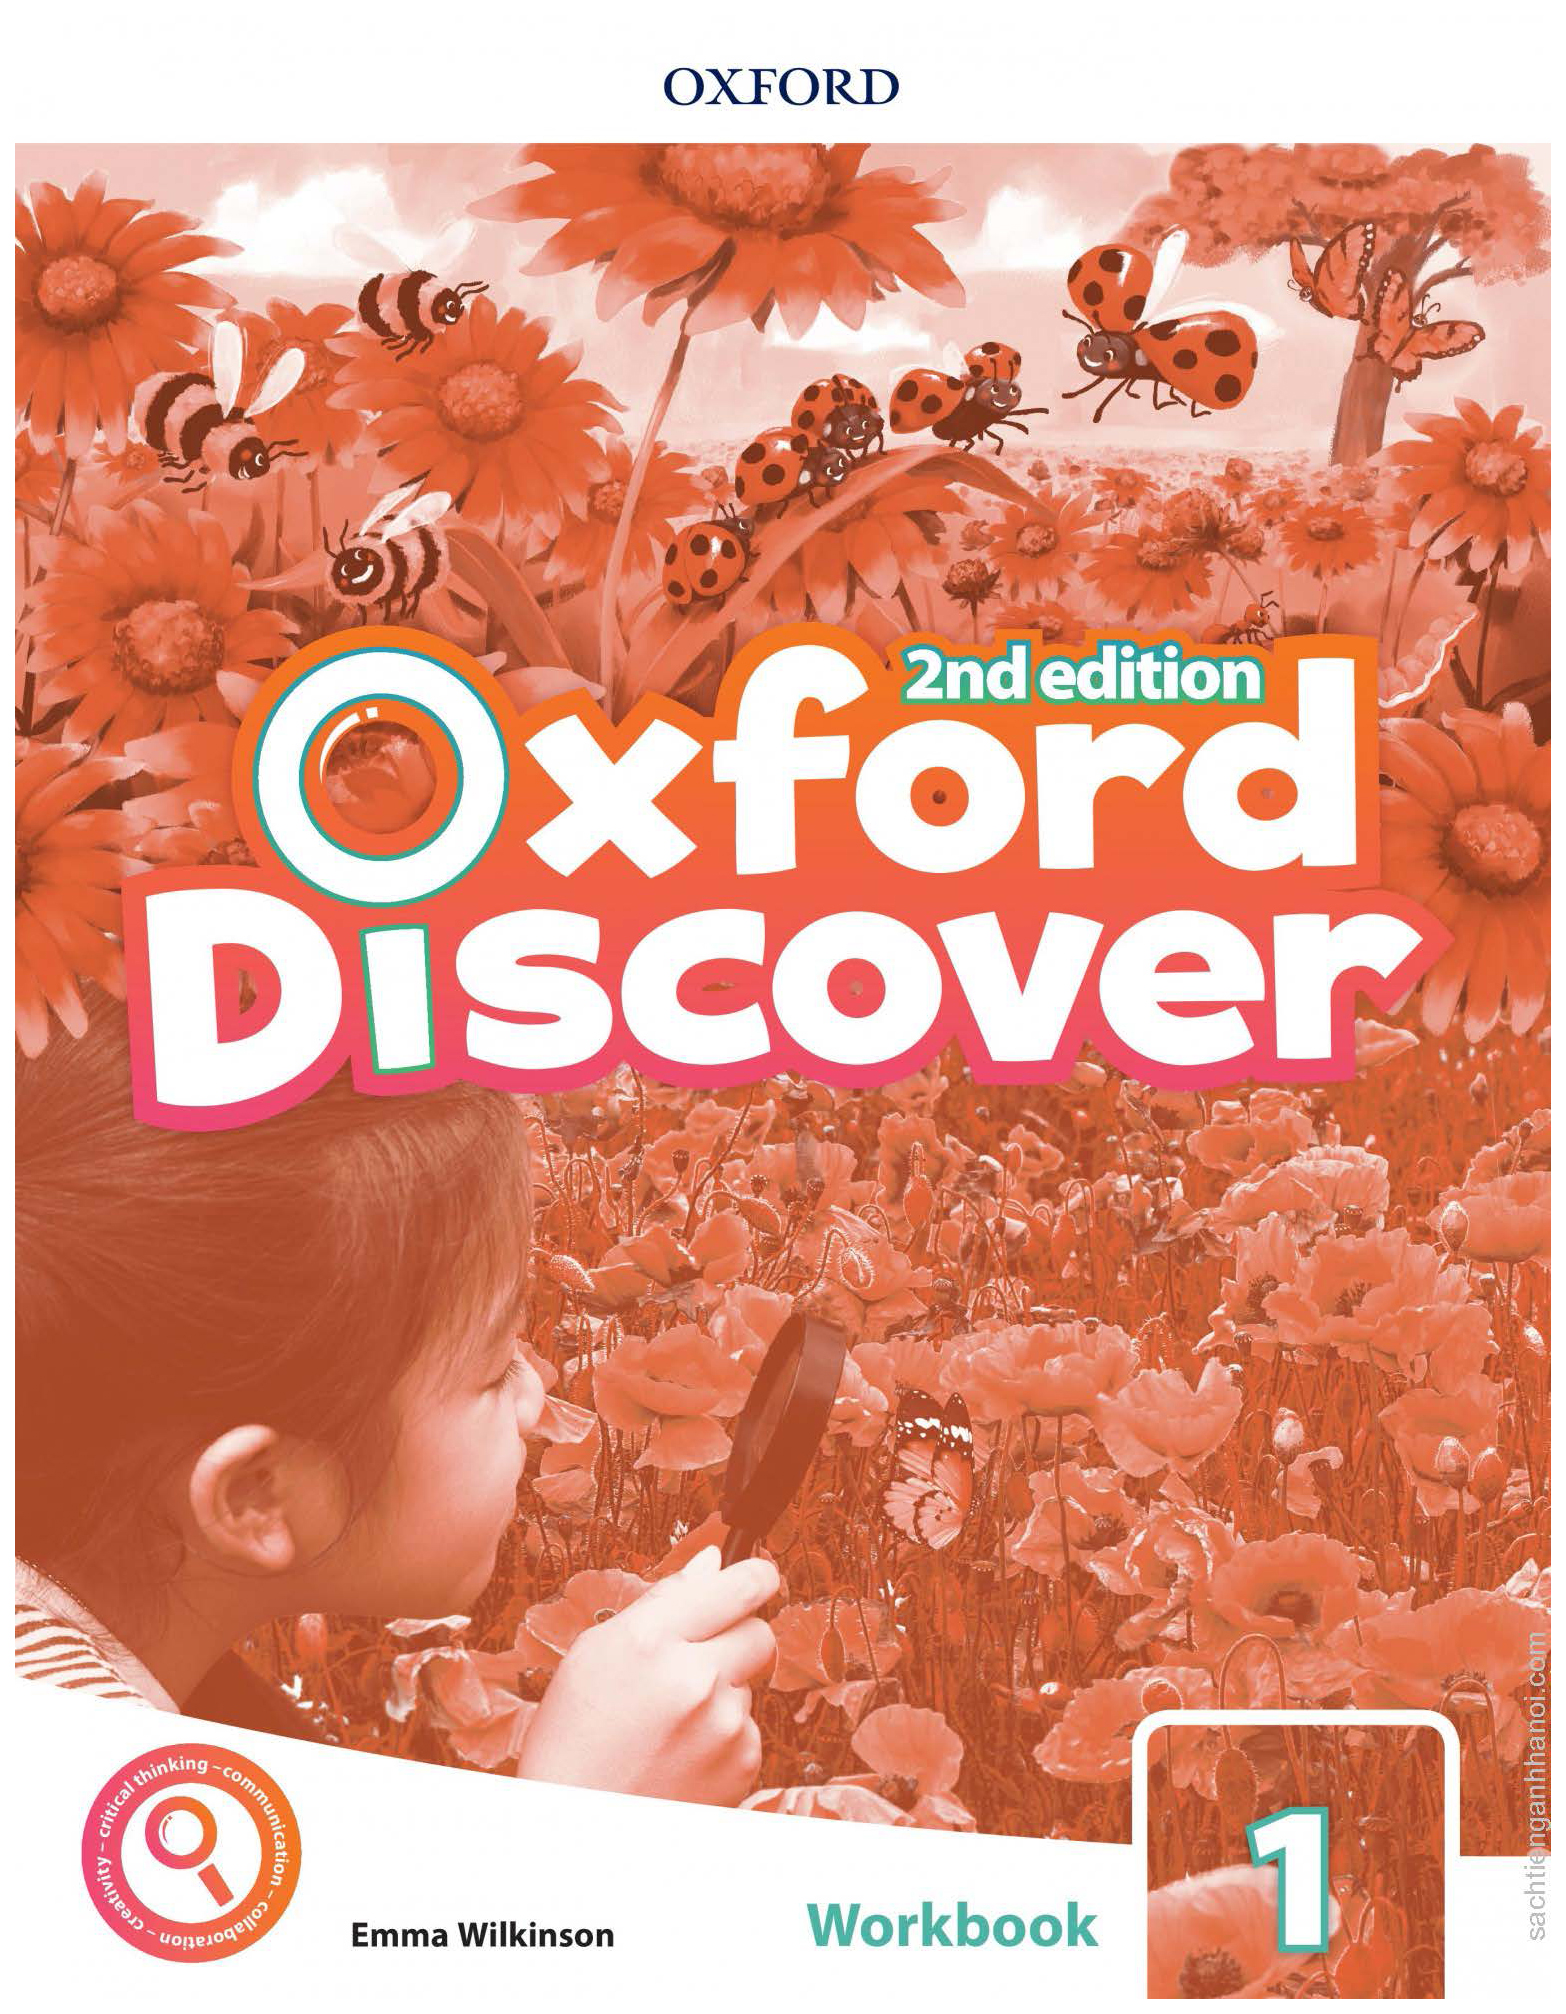 Oxford discover book. Workbook Oxford Discovery 1. Oxford discover 1 student book 2nd Edition Audio. Oxford discover 1 student's book 2nd Edition.